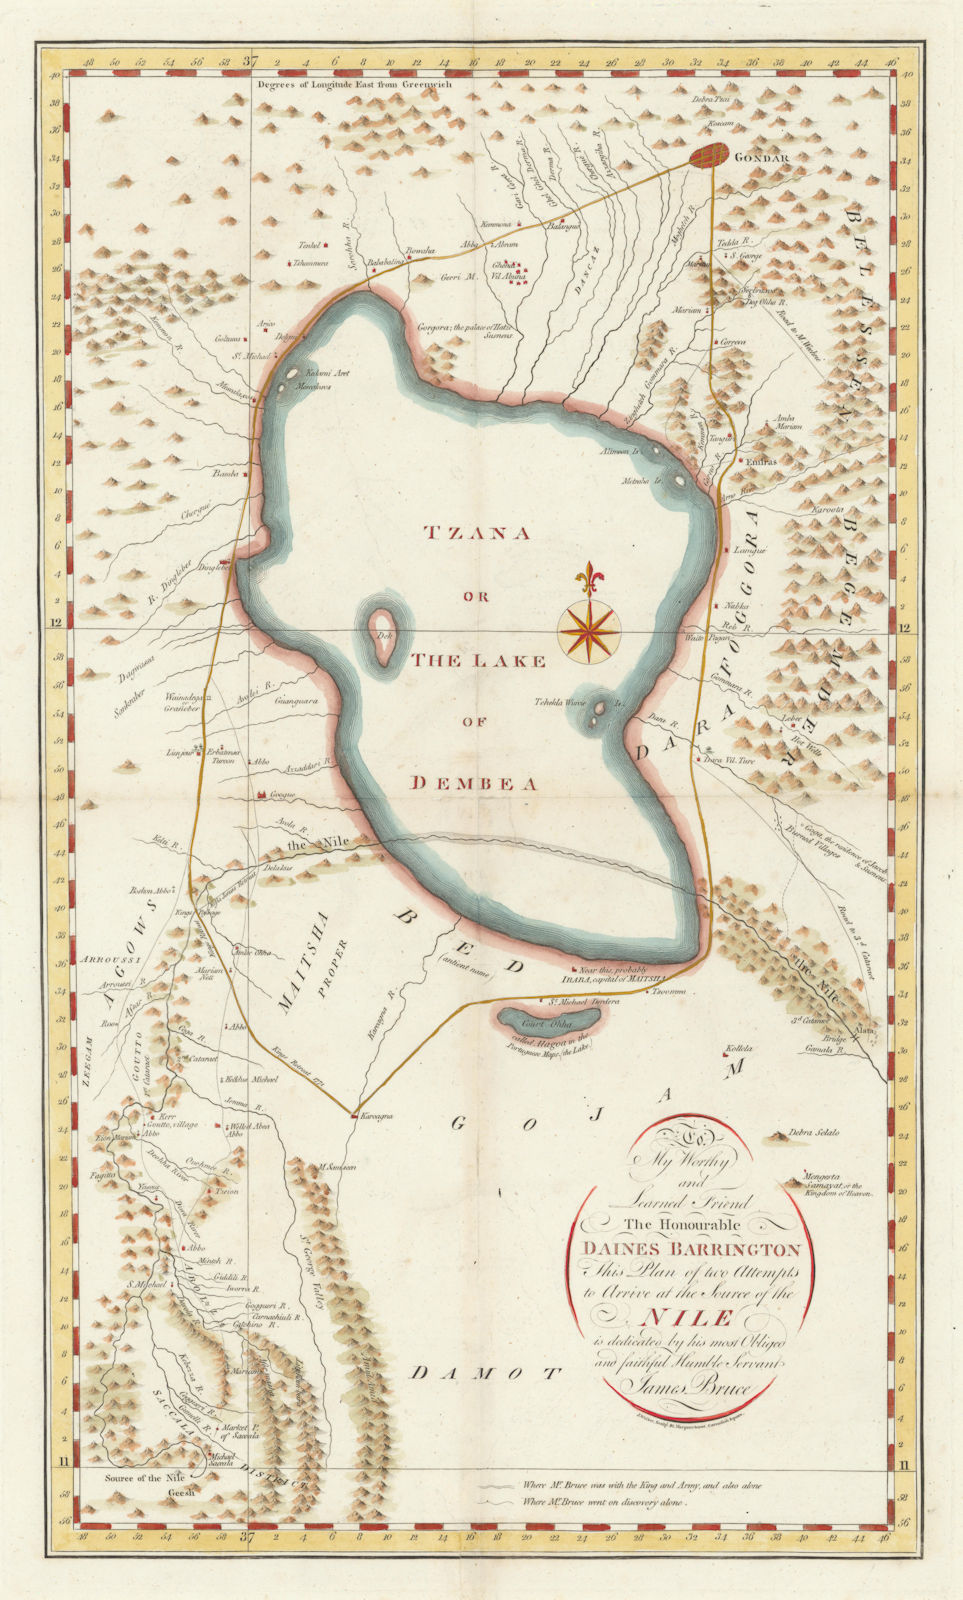 Associate Product Plan of two attempts to arrive at the source of the Nile by James Bruce 1804 map